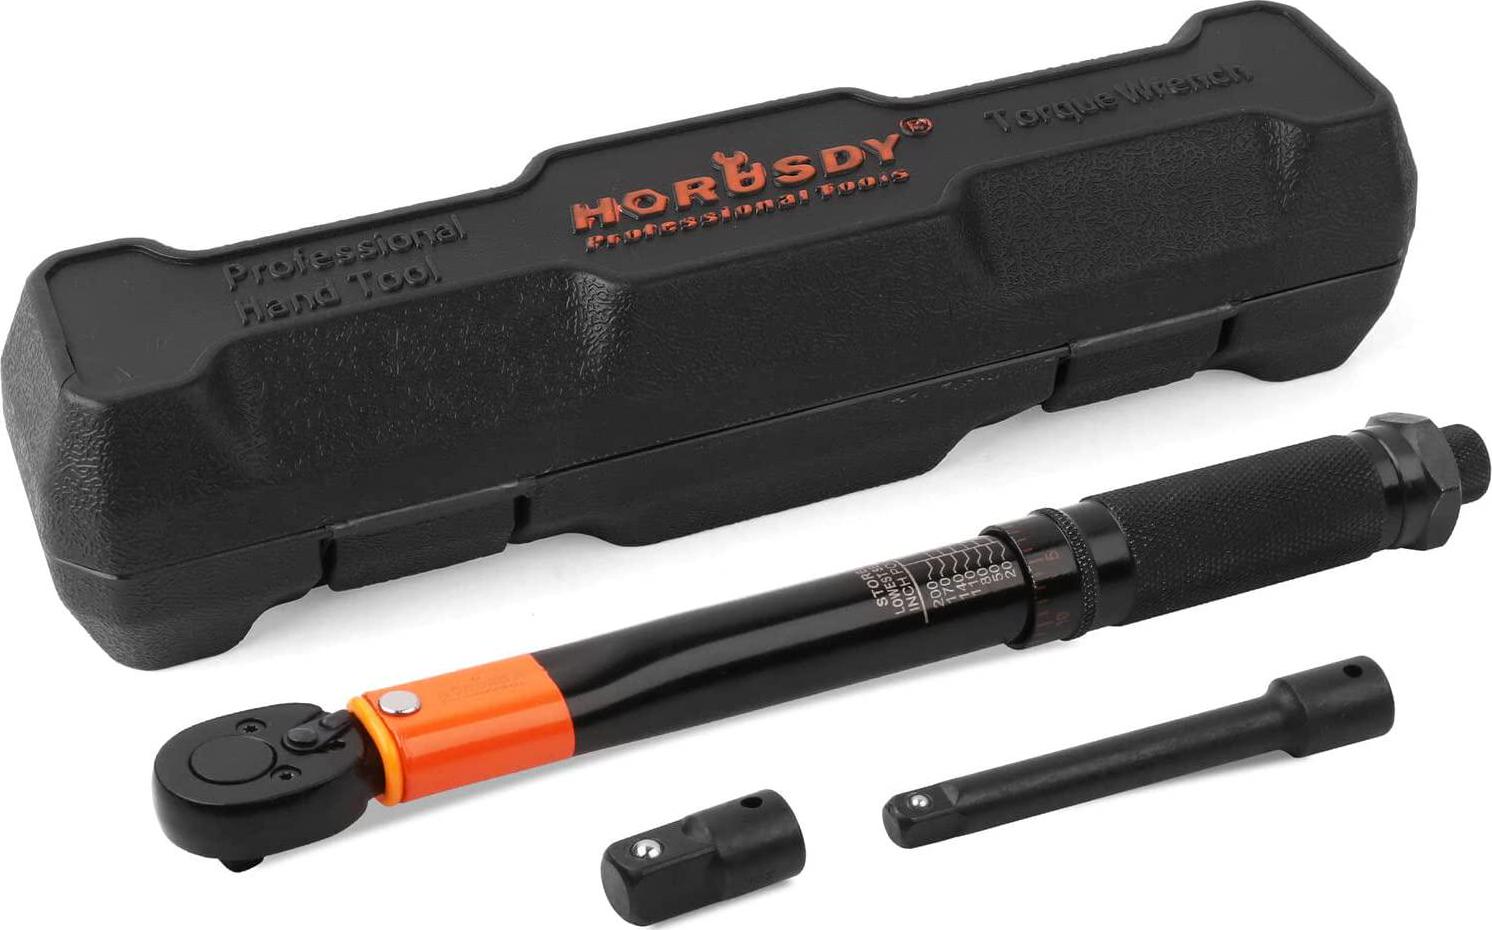 HORUSDY, HORUSDY 3-Piece Ratchet Click Torque Wrench Set, 1/4-Inch Drive with Socket Adaptors and Extension Bar